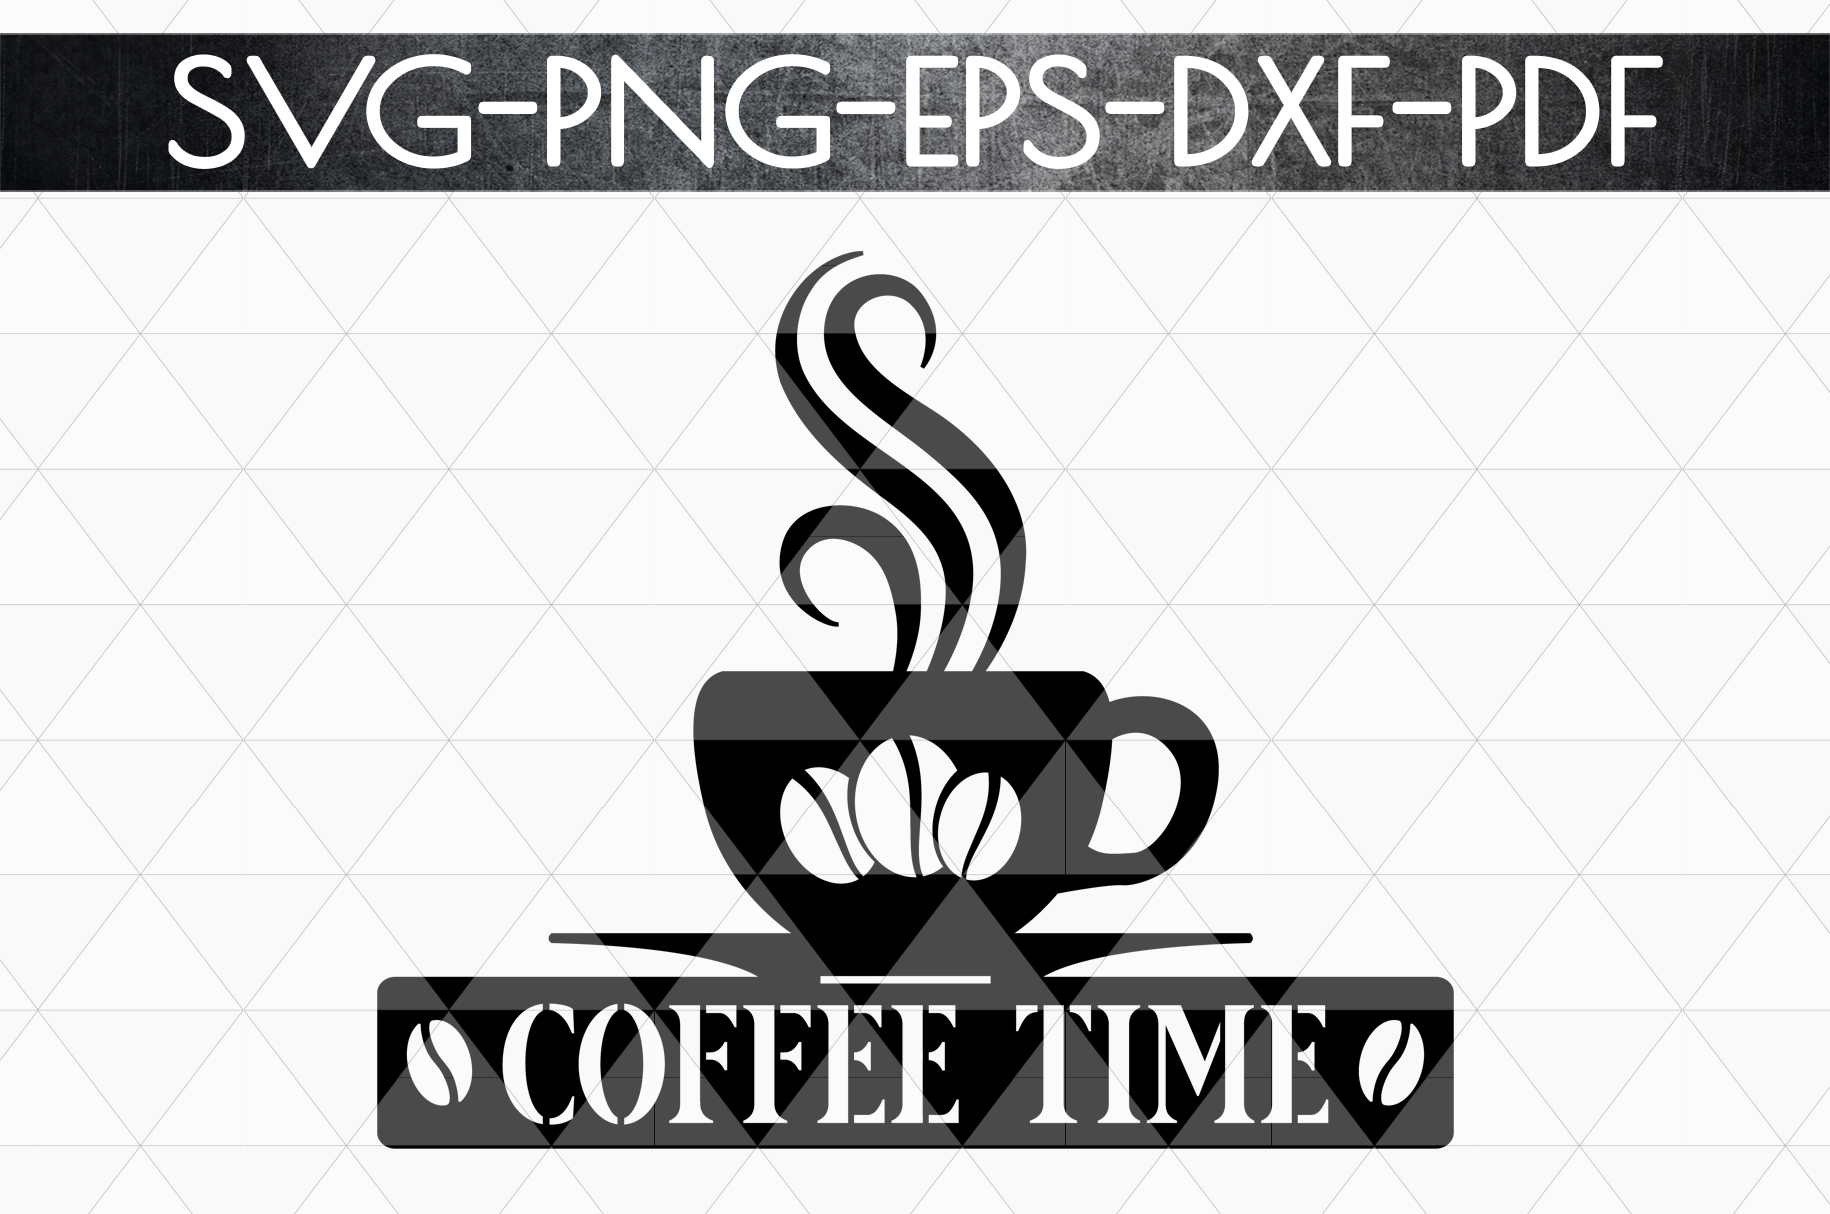 Download Coffee Time Sign Papercut Template, Cafe Decor SVG, DXF, PDF (190580) | Paper Cutting | Design ...